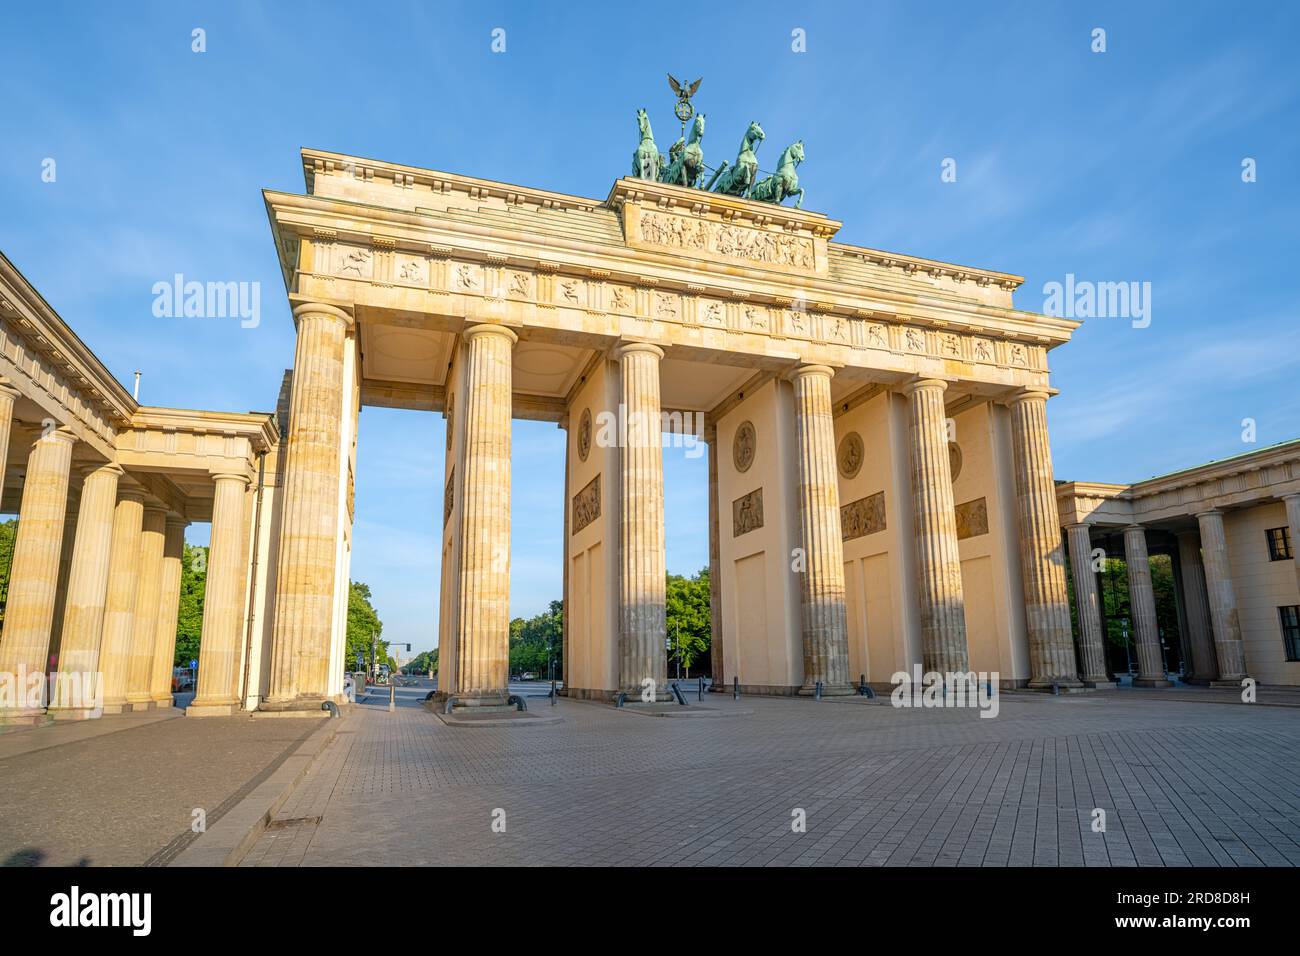 High resolution image of the famous Brandenburg Gate in Berlin, Germany Stock Photo